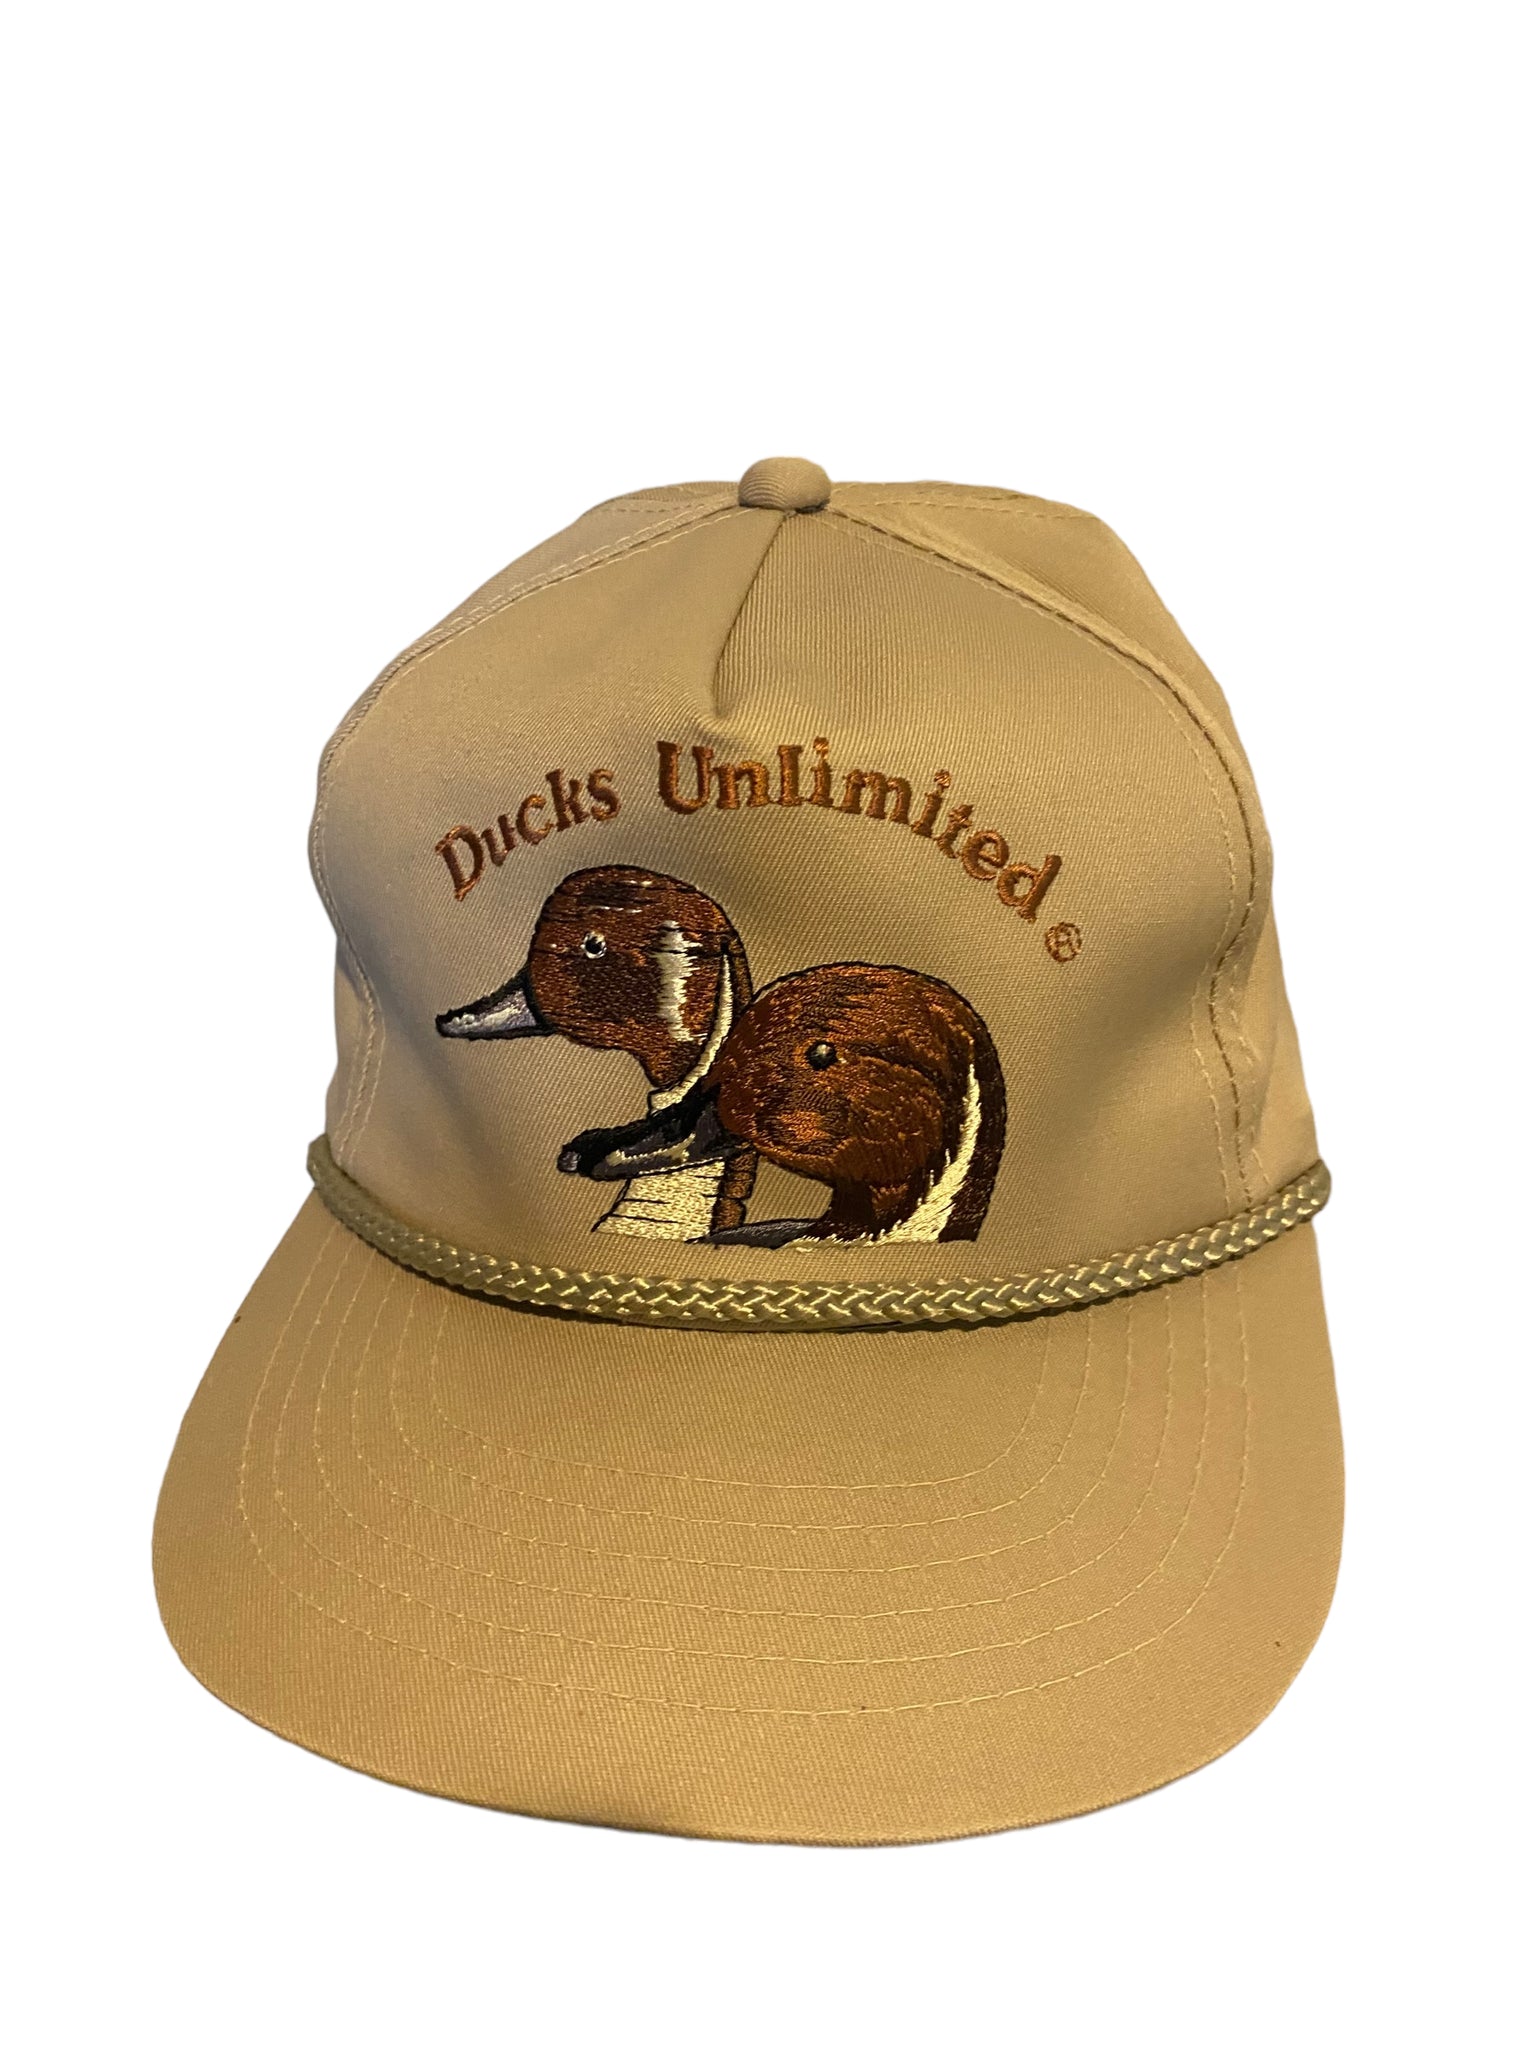 vintage ducks unlimited embroidered logo rope hat snapback gray